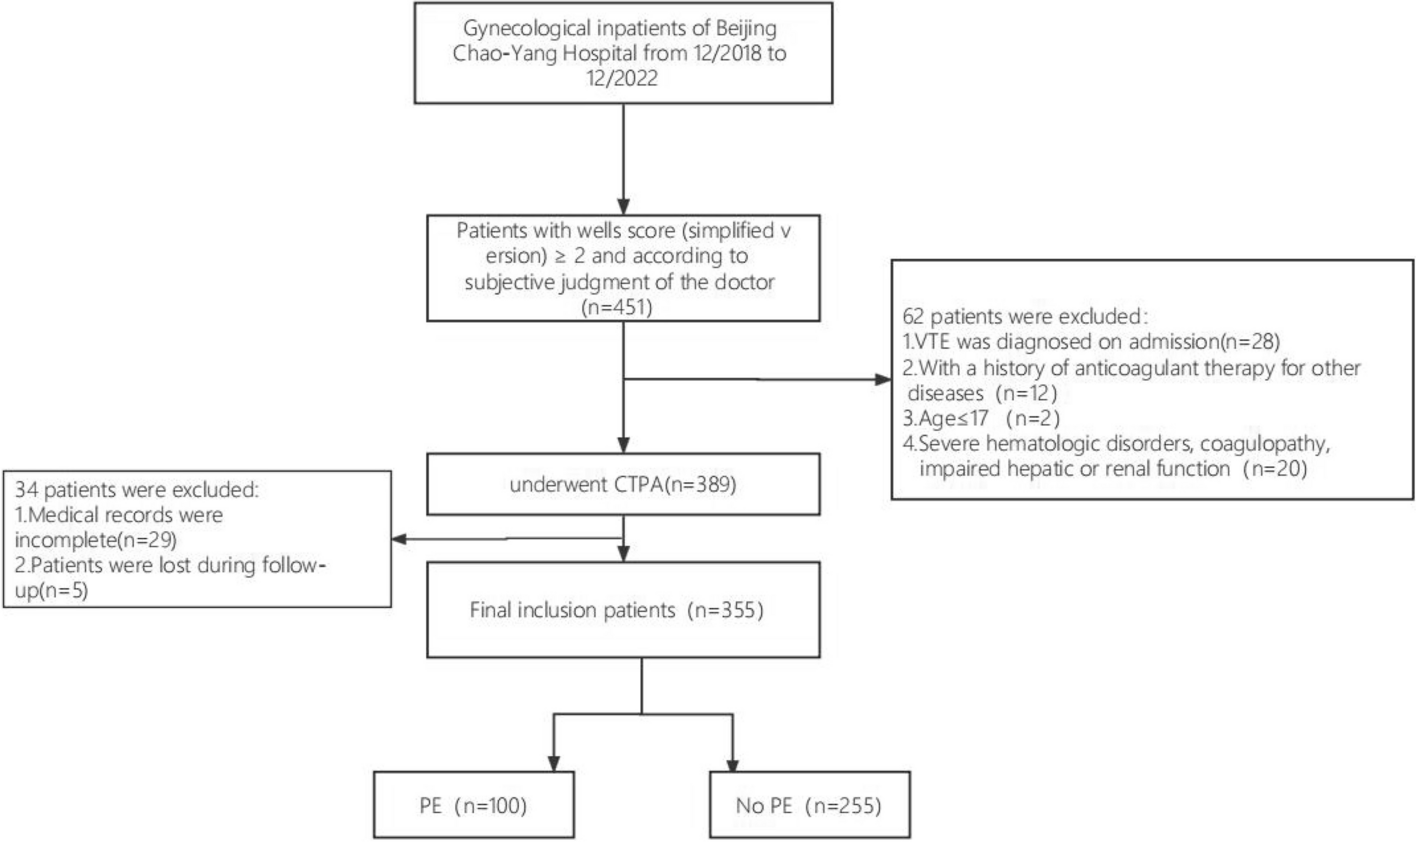 Validation of a pulmonary embolism risk assessment model in gynecological inpatients